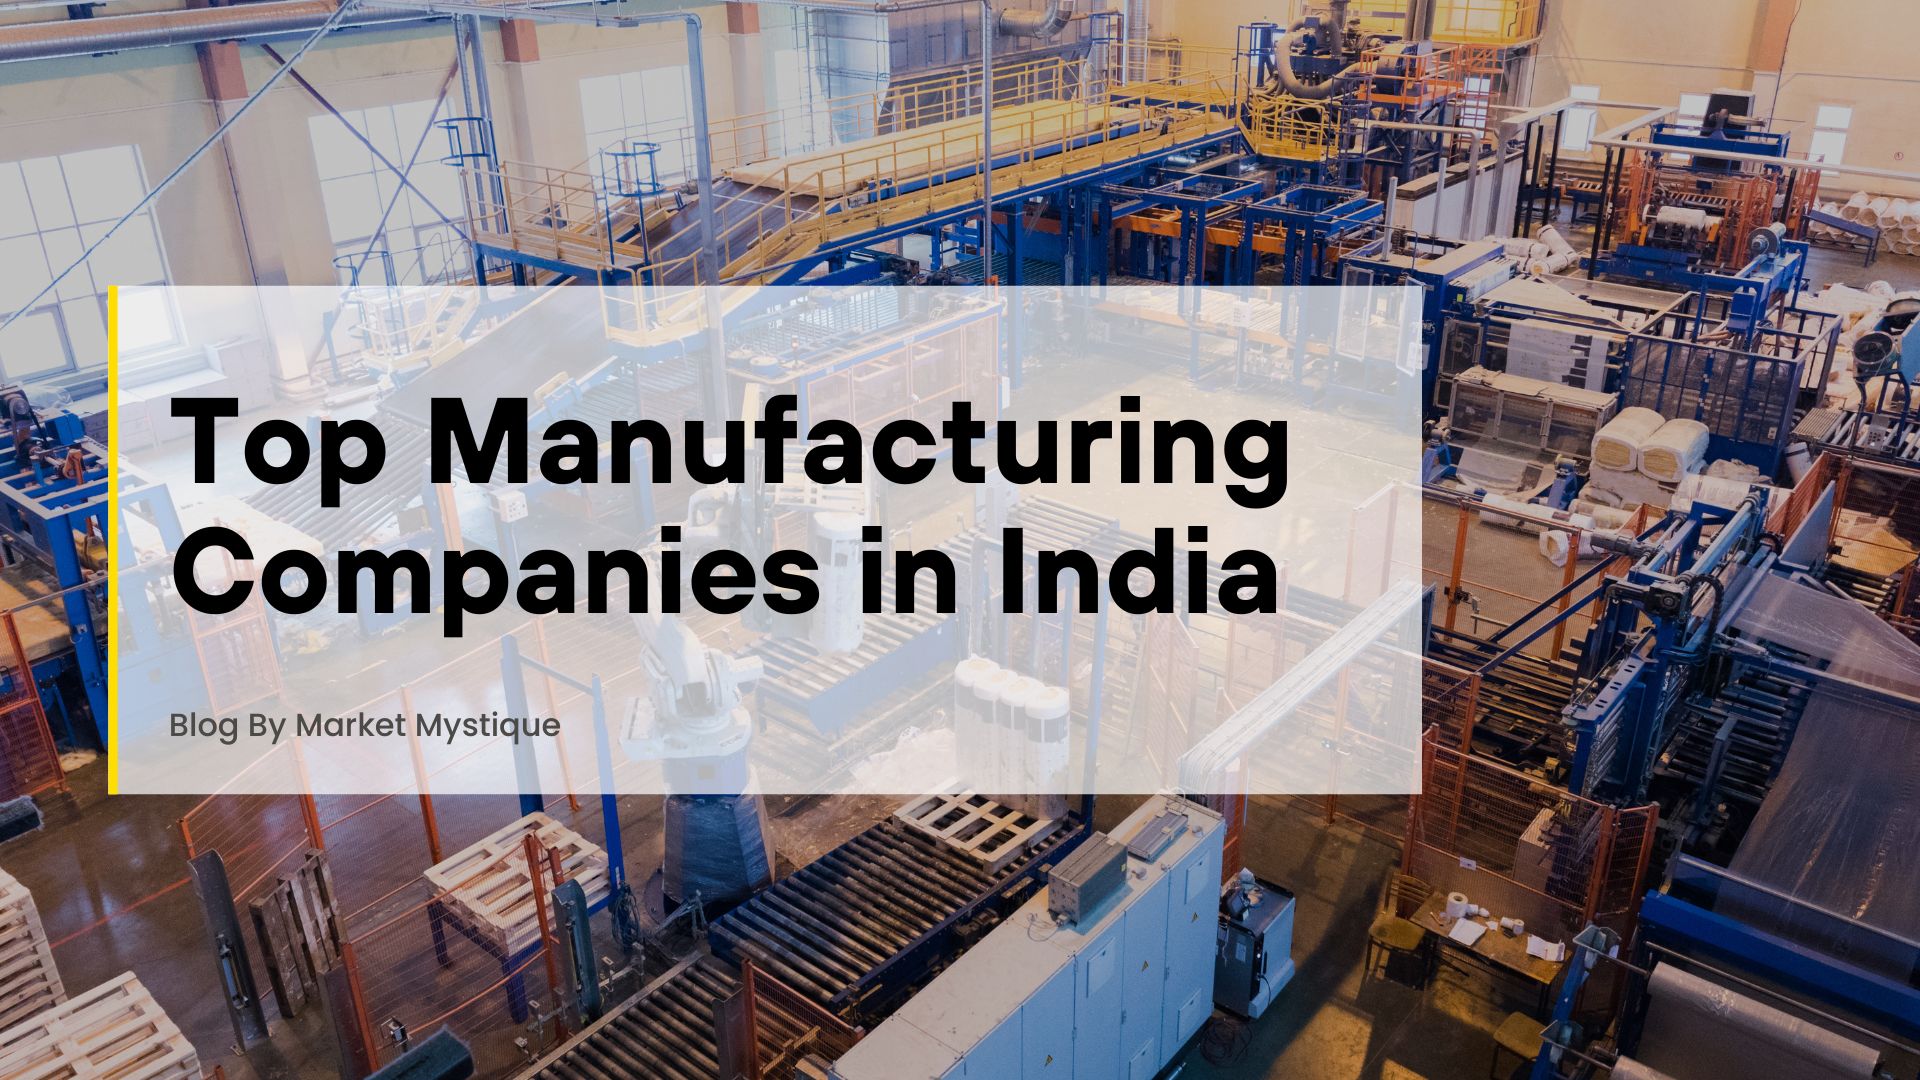 Top Manufacturing Companies in India